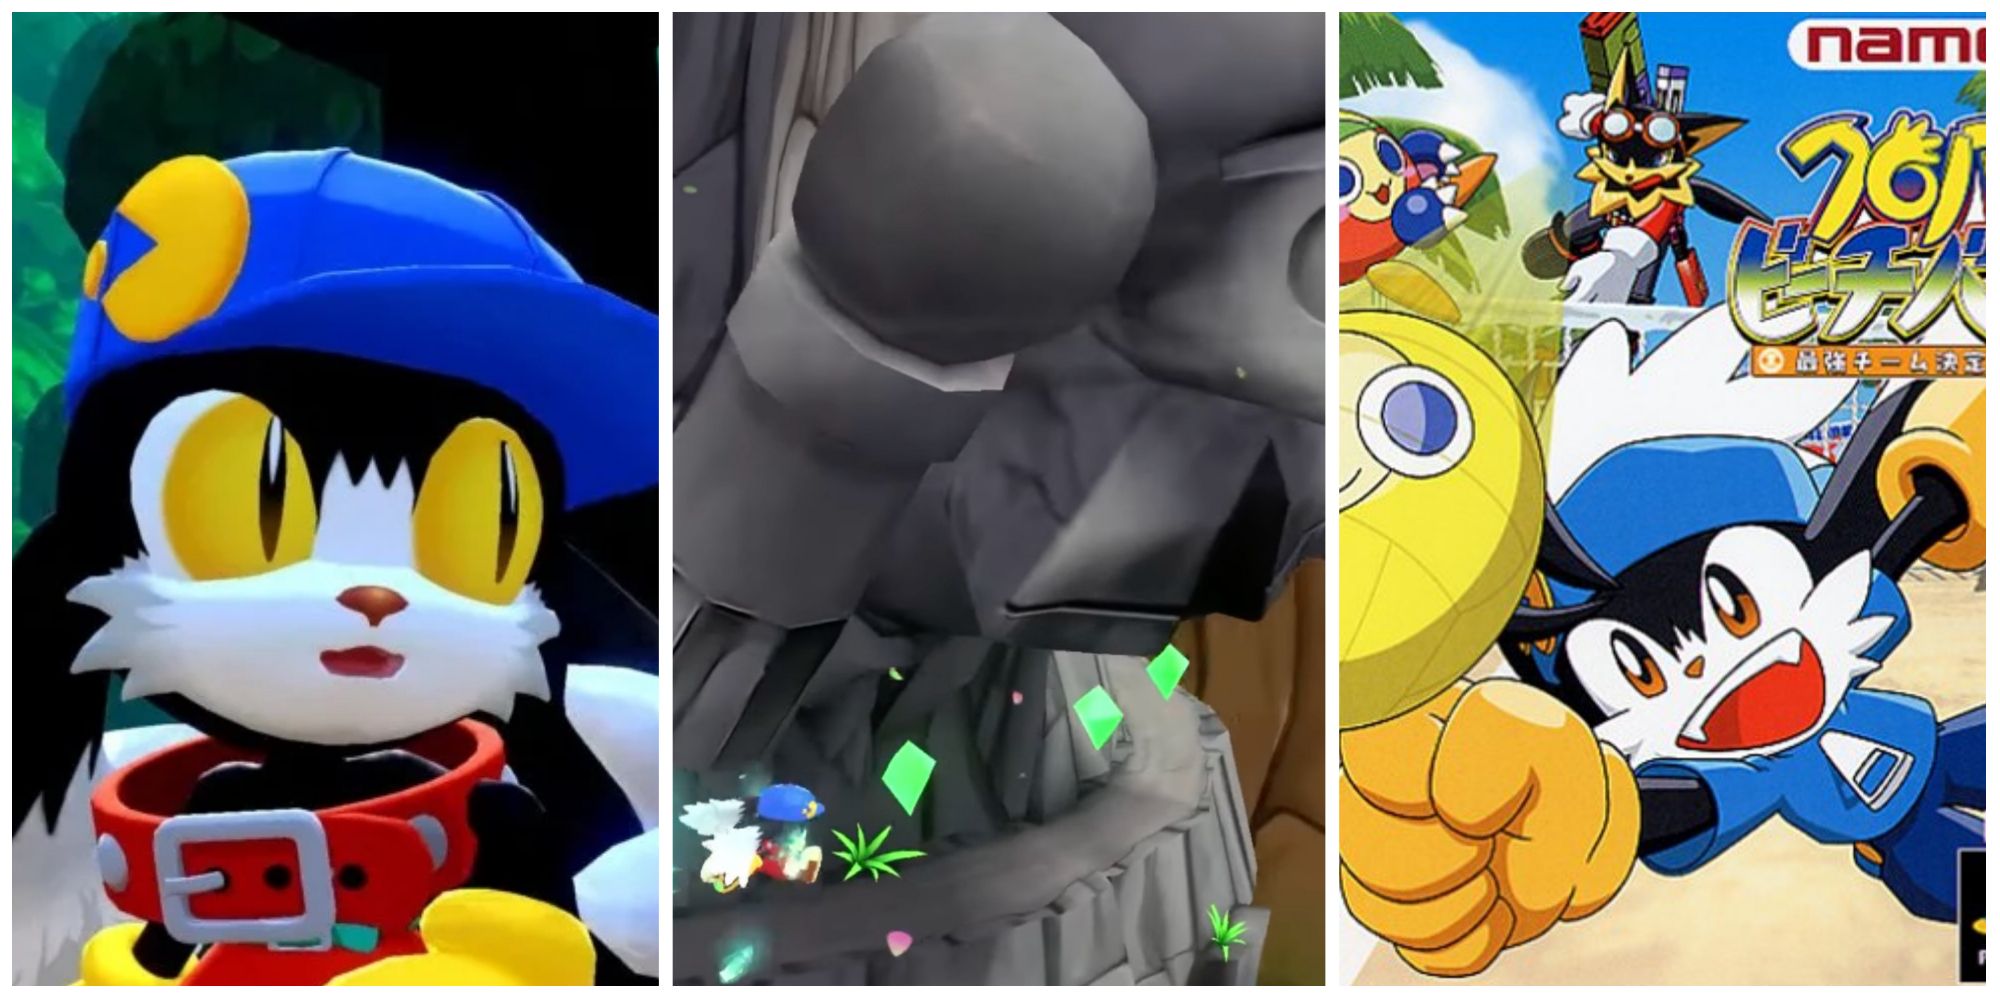 A collage of images from Klonoa Phantasy Reverie Series, alongside the box art for Klonoa Beach Volleyball